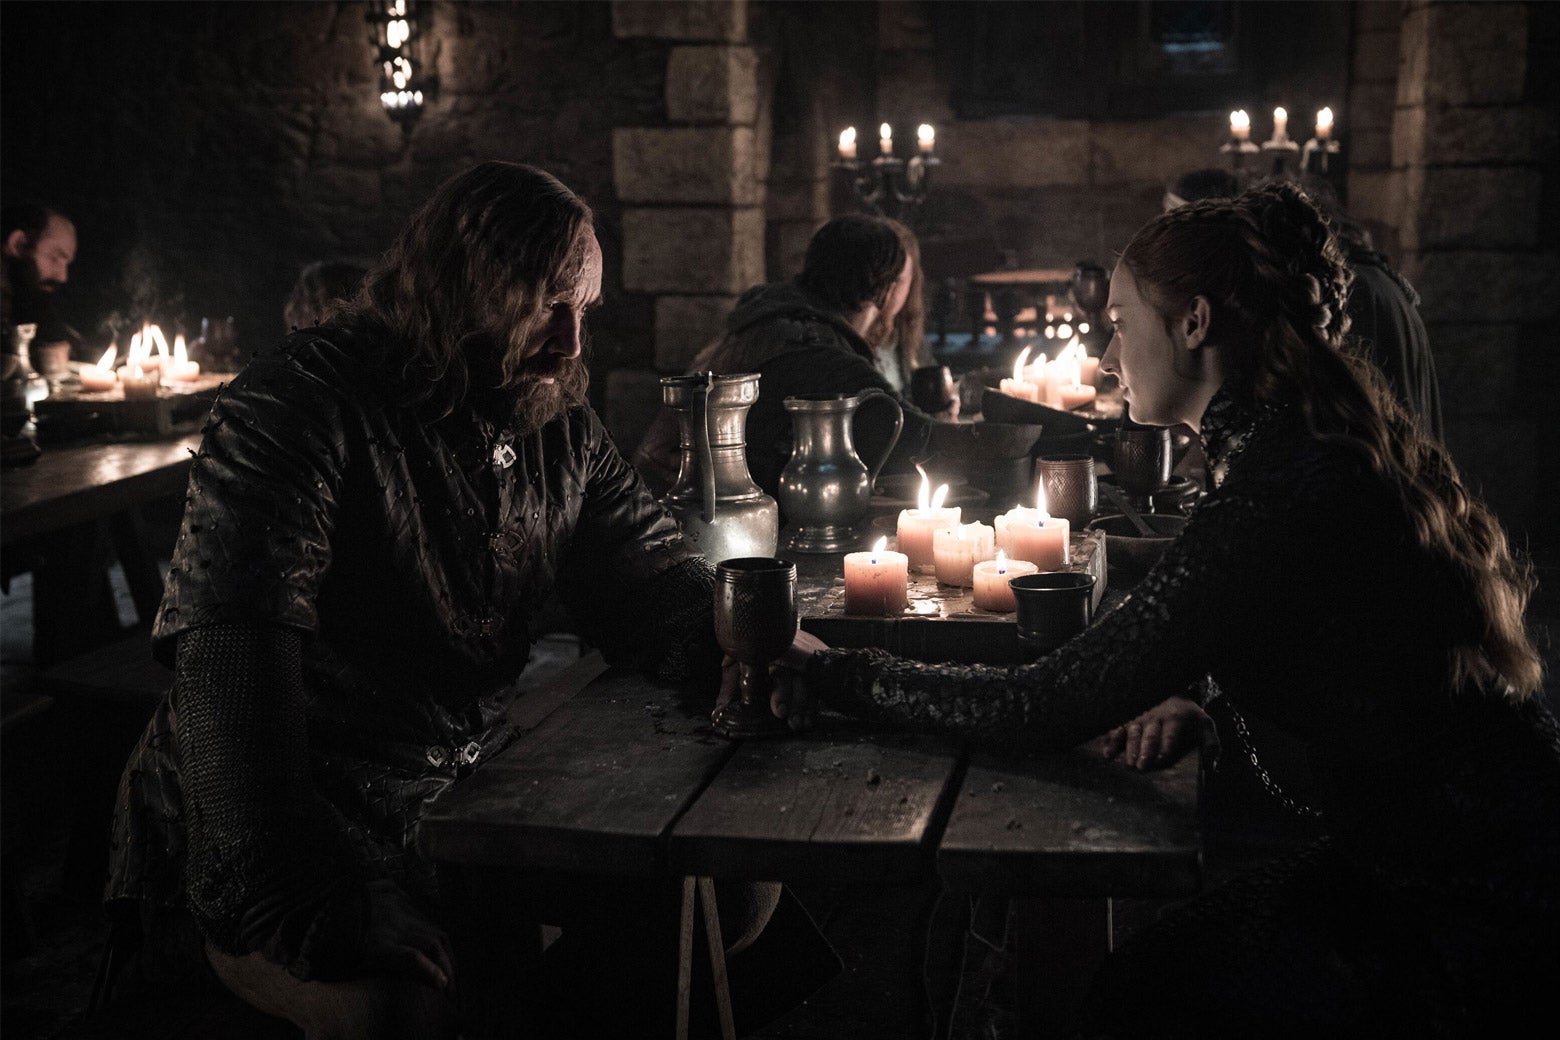 The Hound and Sansa sit across from each other at a table.